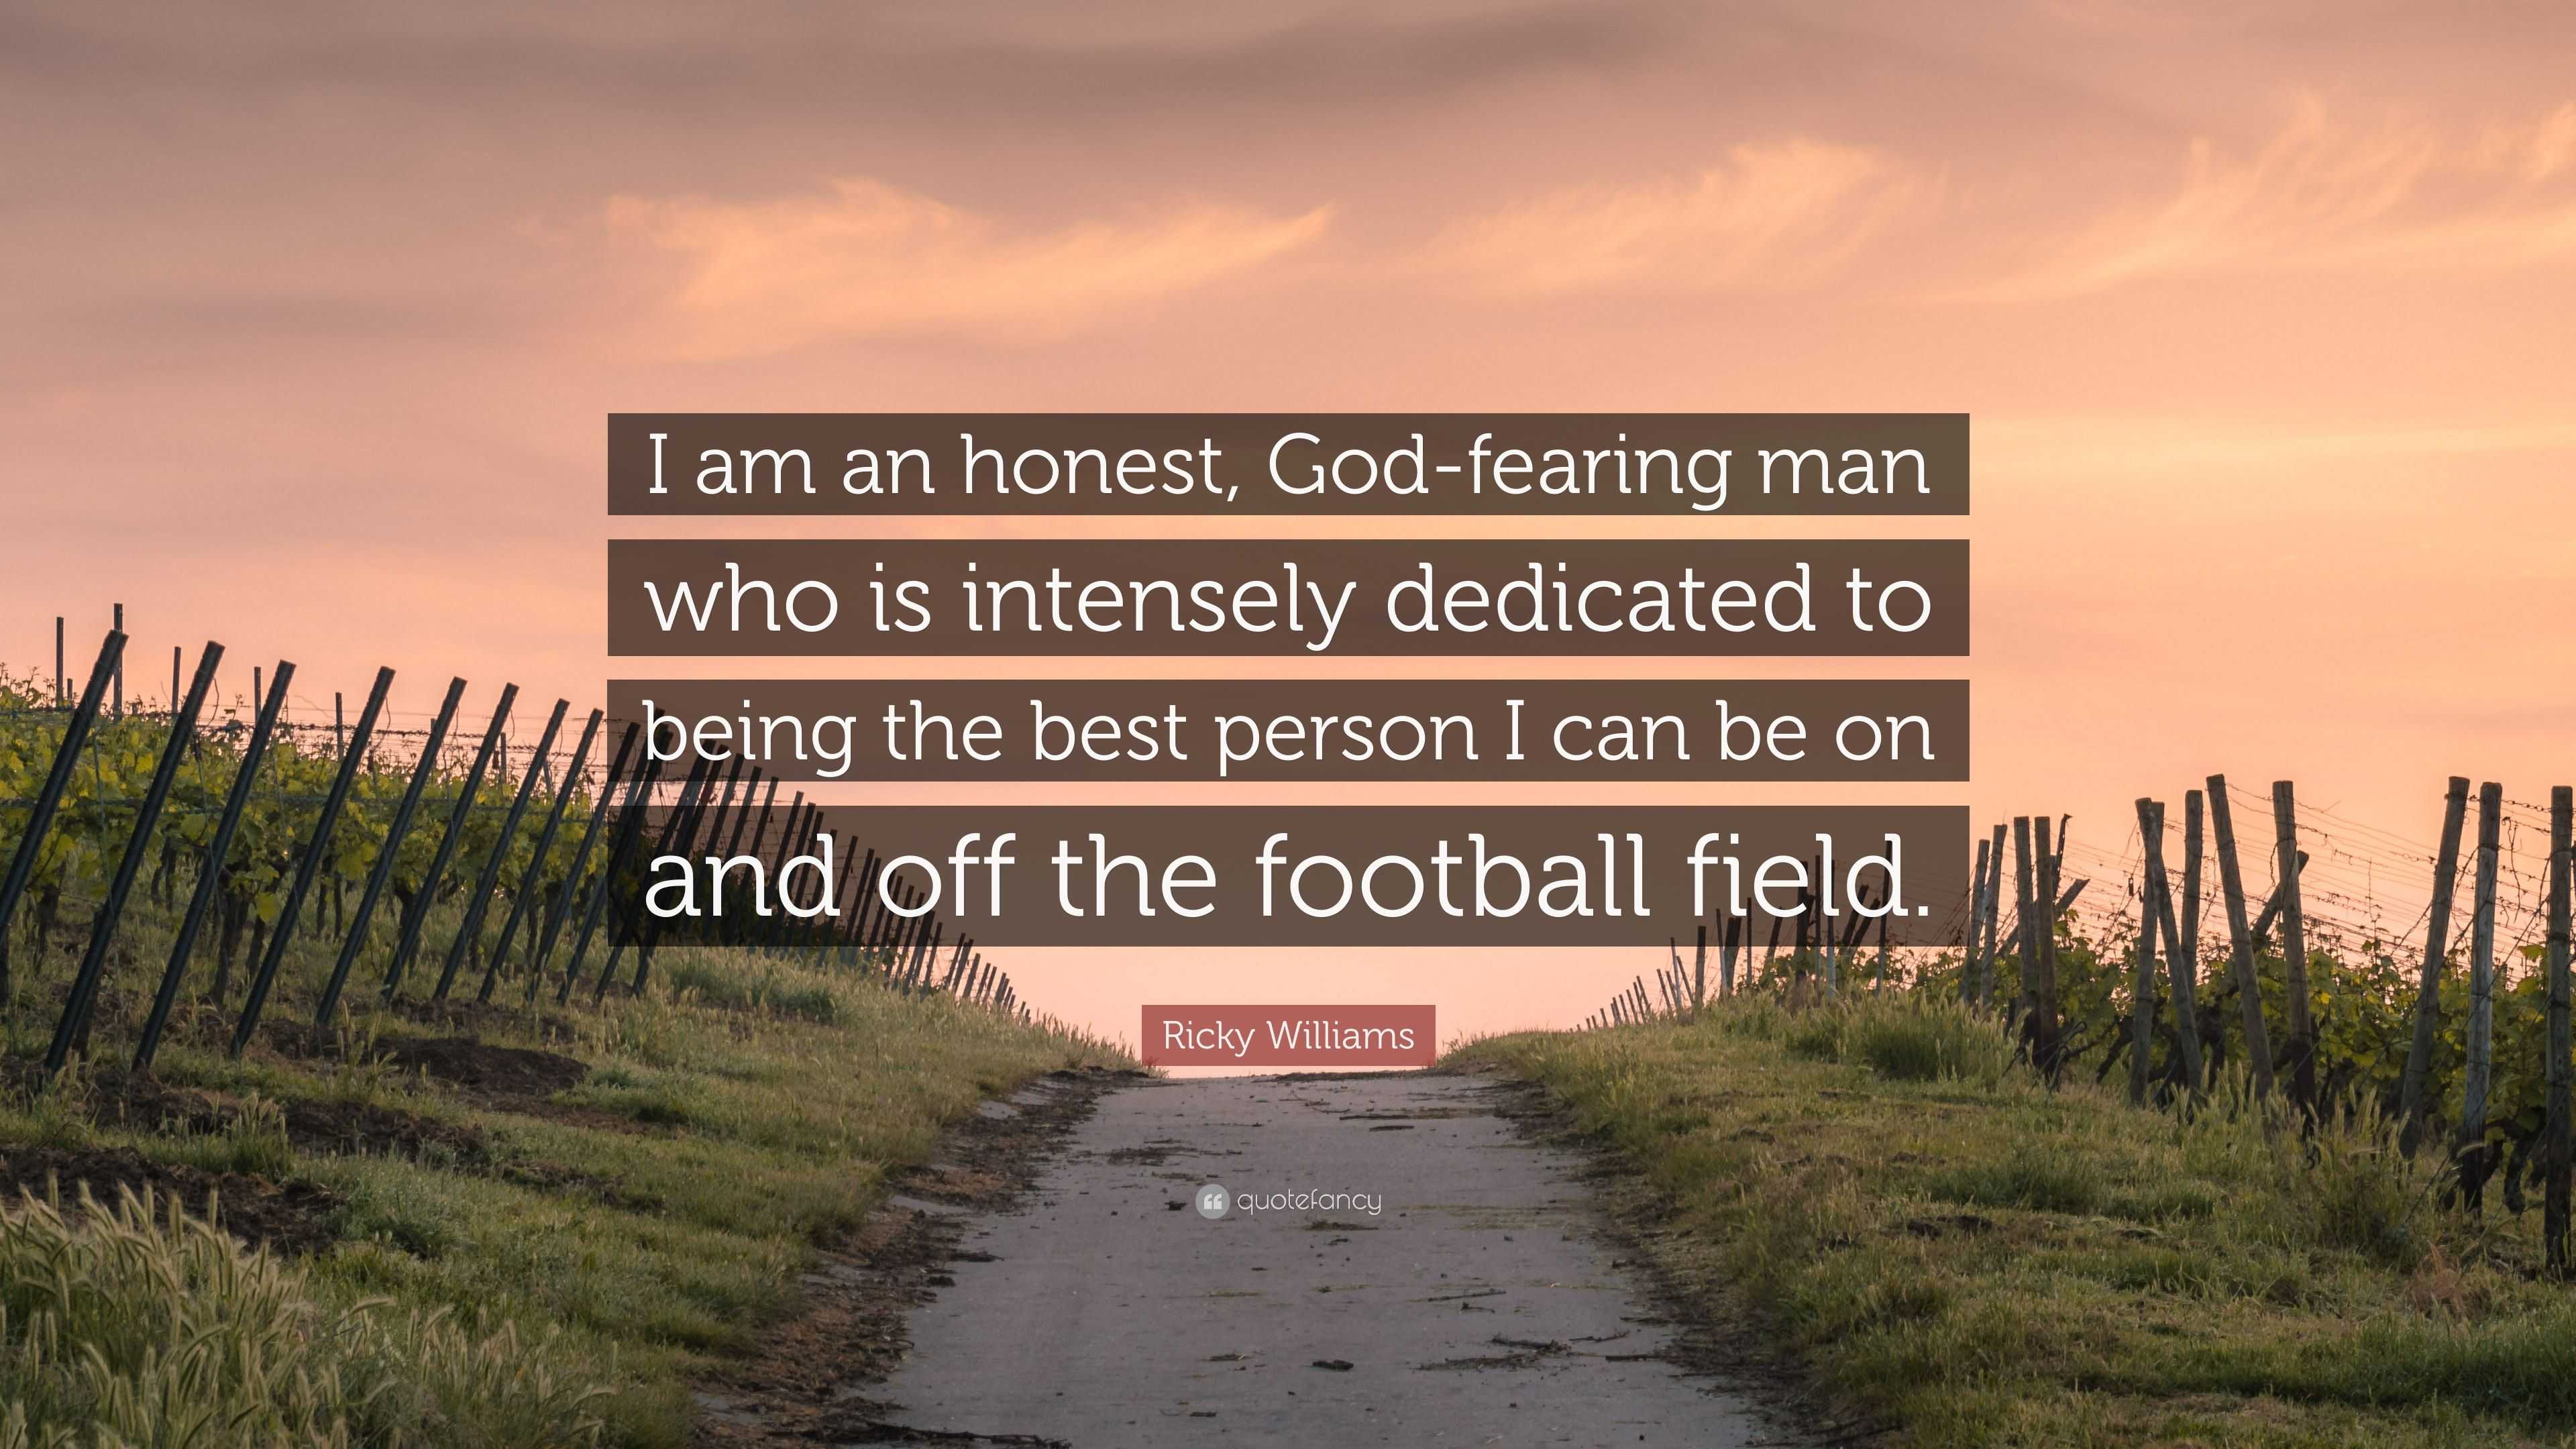 Ricky Williams Quote I Am An Honest God Fearing Man Who Is Intensely Dedicated To Being The Best Person I Can Be On And Off The Football Fie